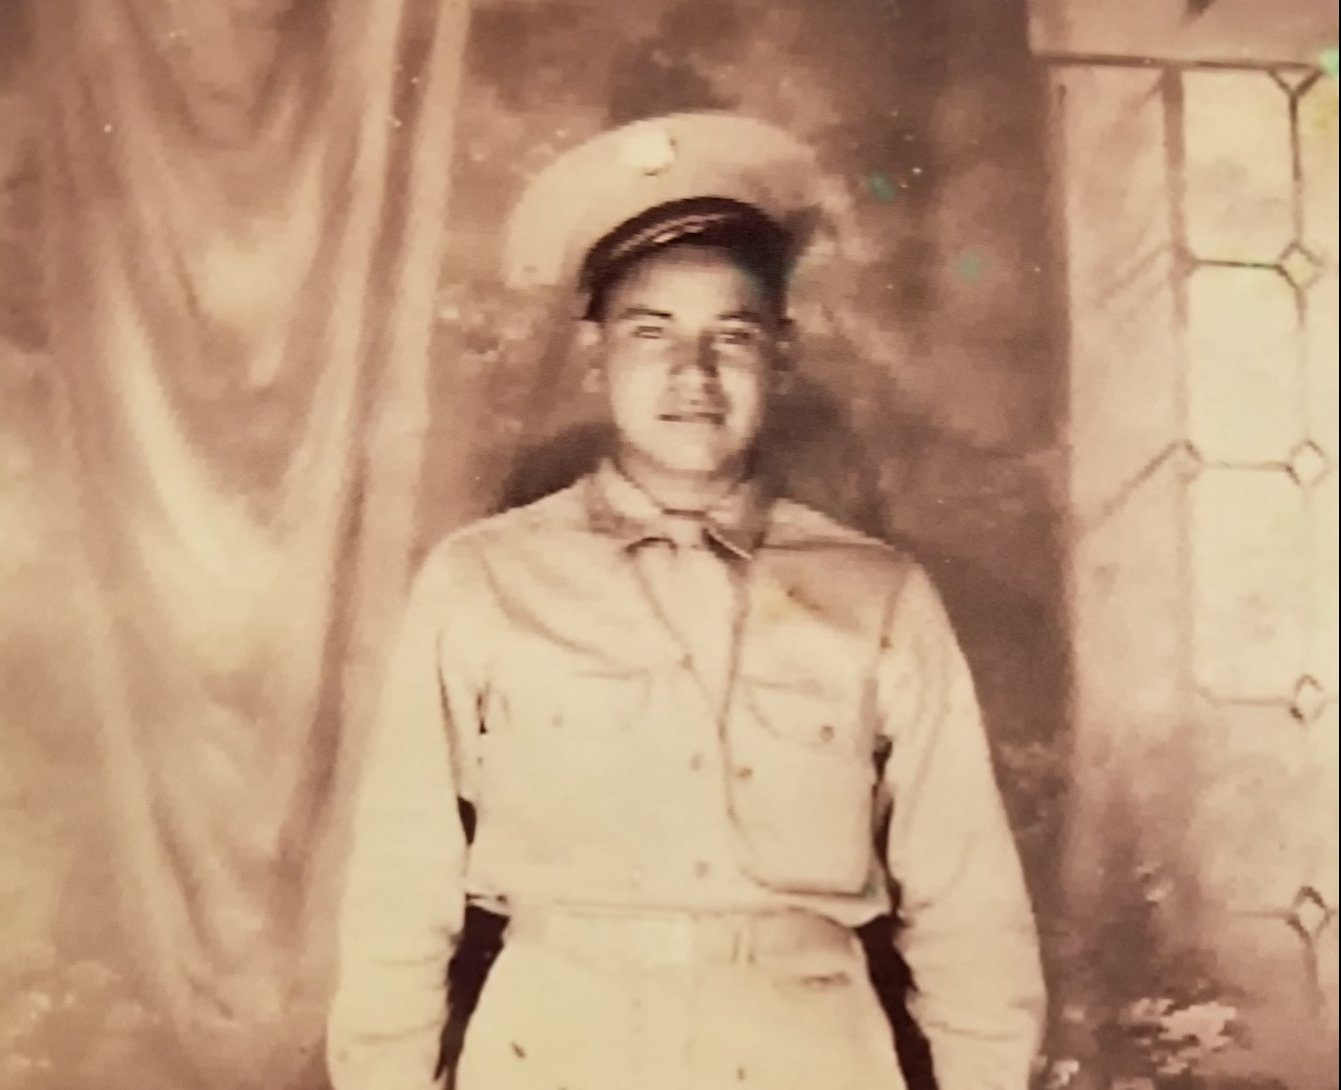 Louis Levi Oakes, the last of the Mohawk code talkers, who helped American soldiers triumph in the Pacific Theater during World War II, along with code talkers from other tribes, died on May 28 at a care facility near his home on the Akwesasne Mohawk Reservation in Quebec. He was 94.